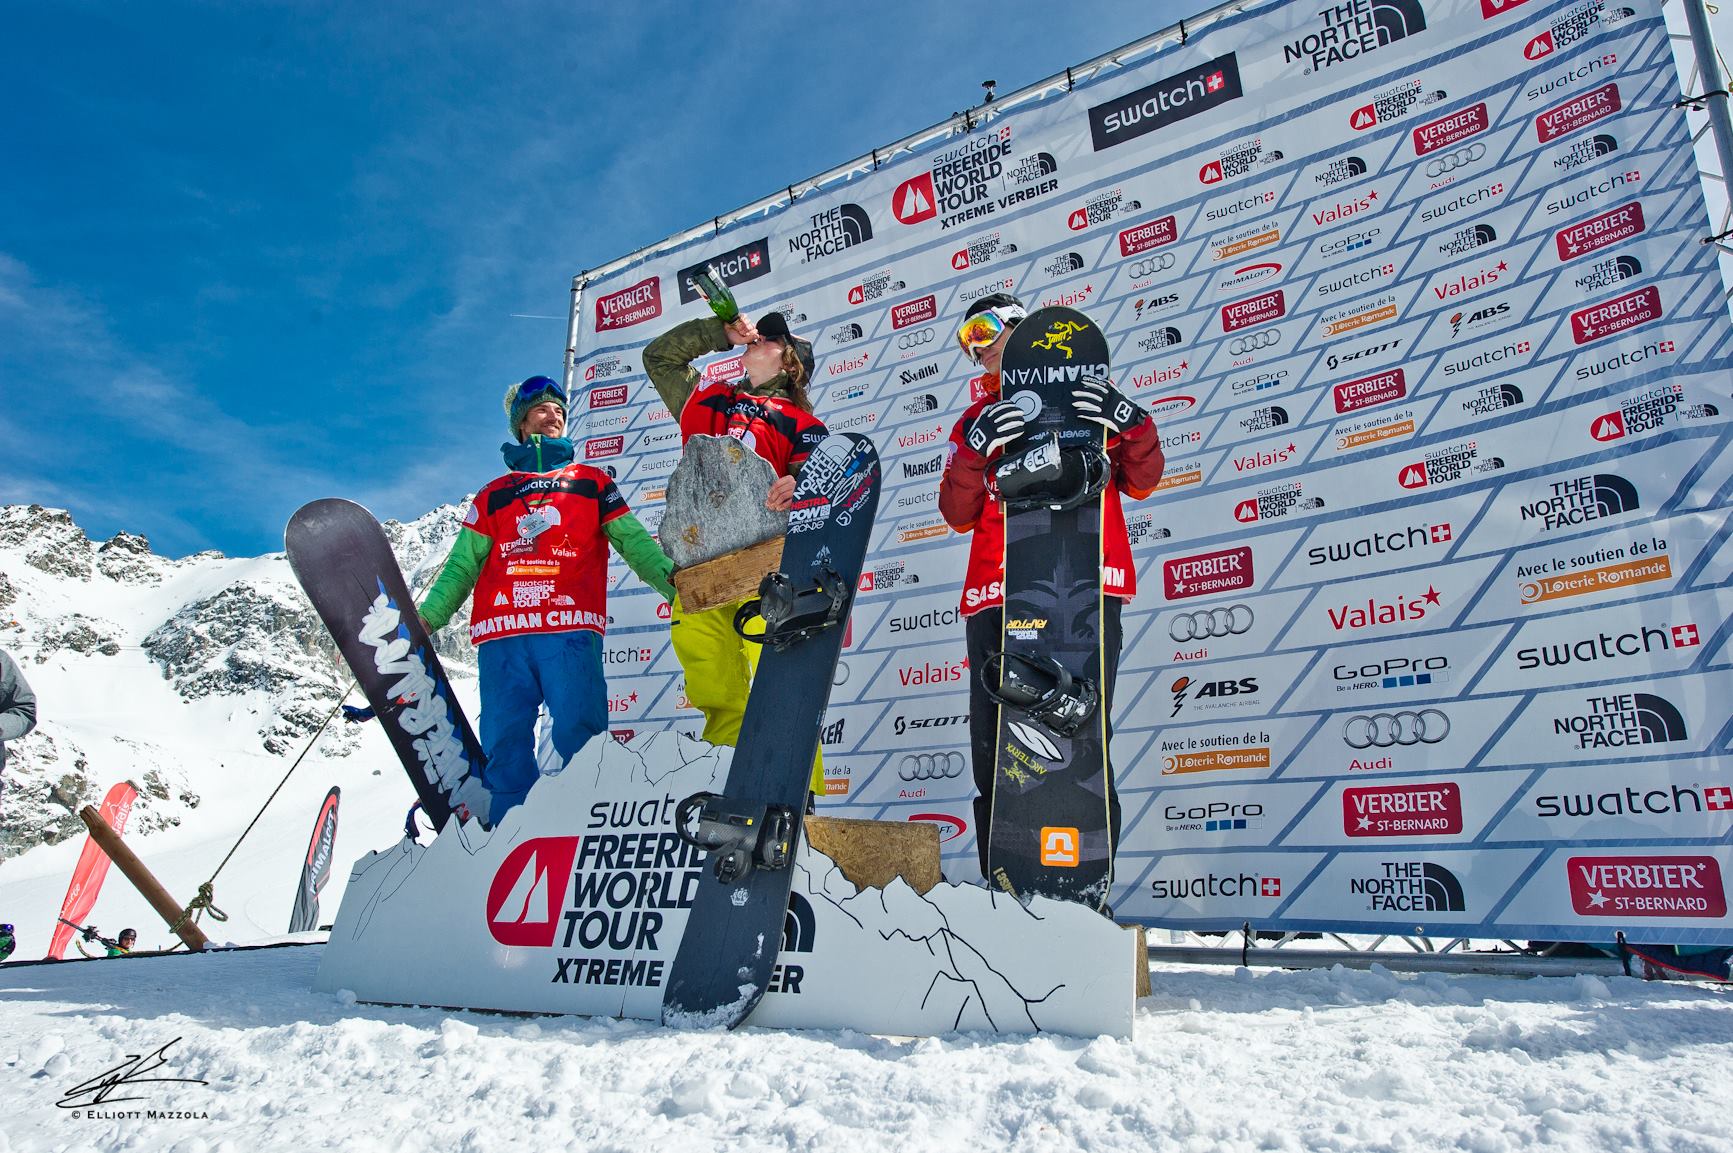 Sascha Hamm Finishes 3rd in Freeride World Tour